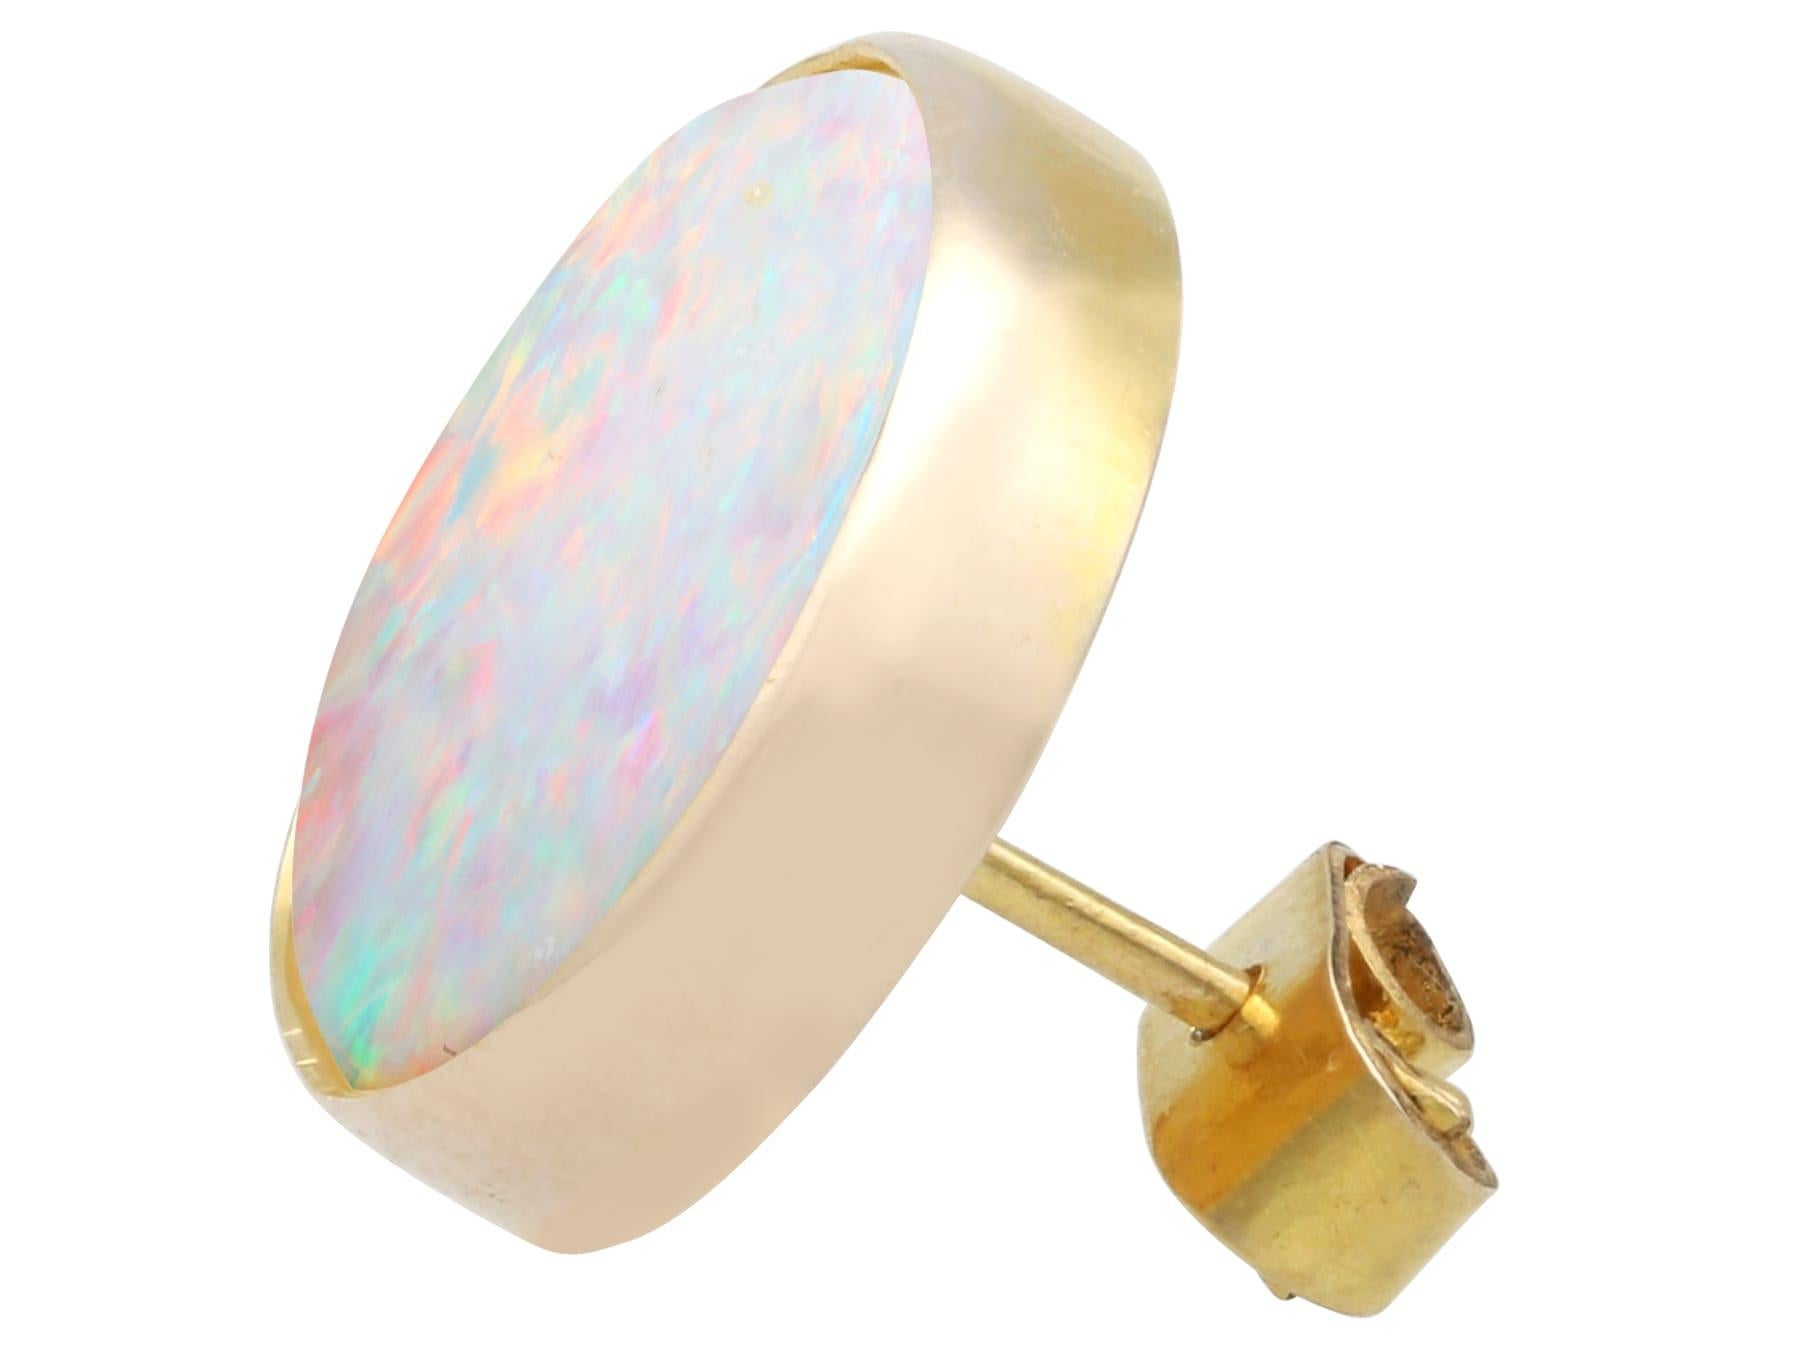 Cabochon Vintage 1950's 4.51 Carat Opal and 9K Gold Stud Earrings For Sale